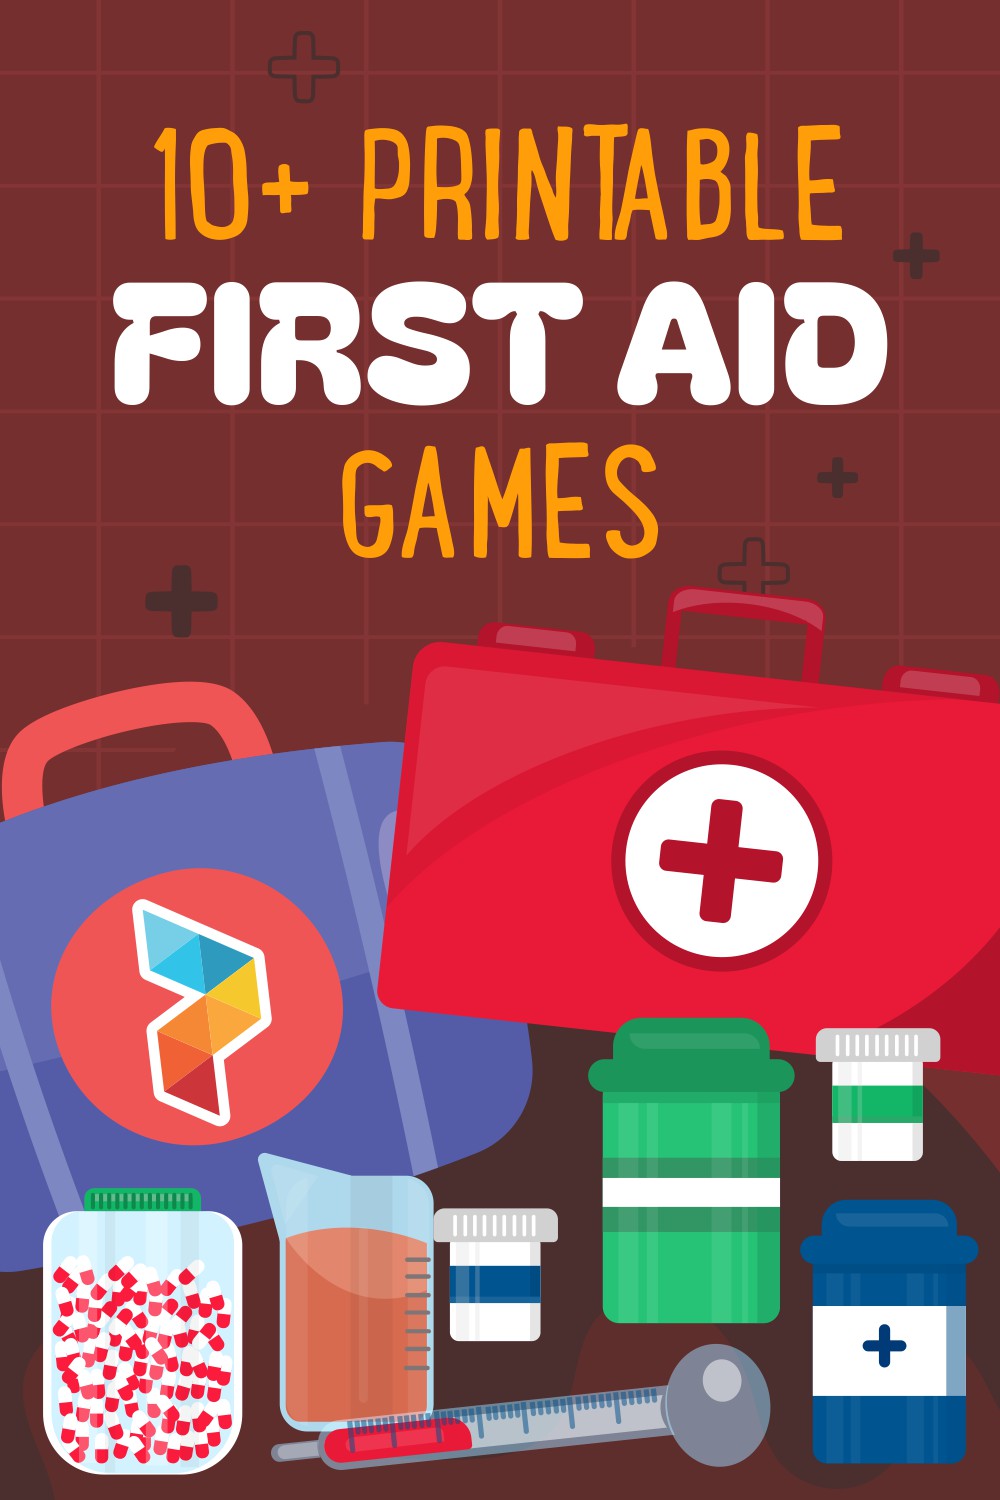 Printable First Aid Games